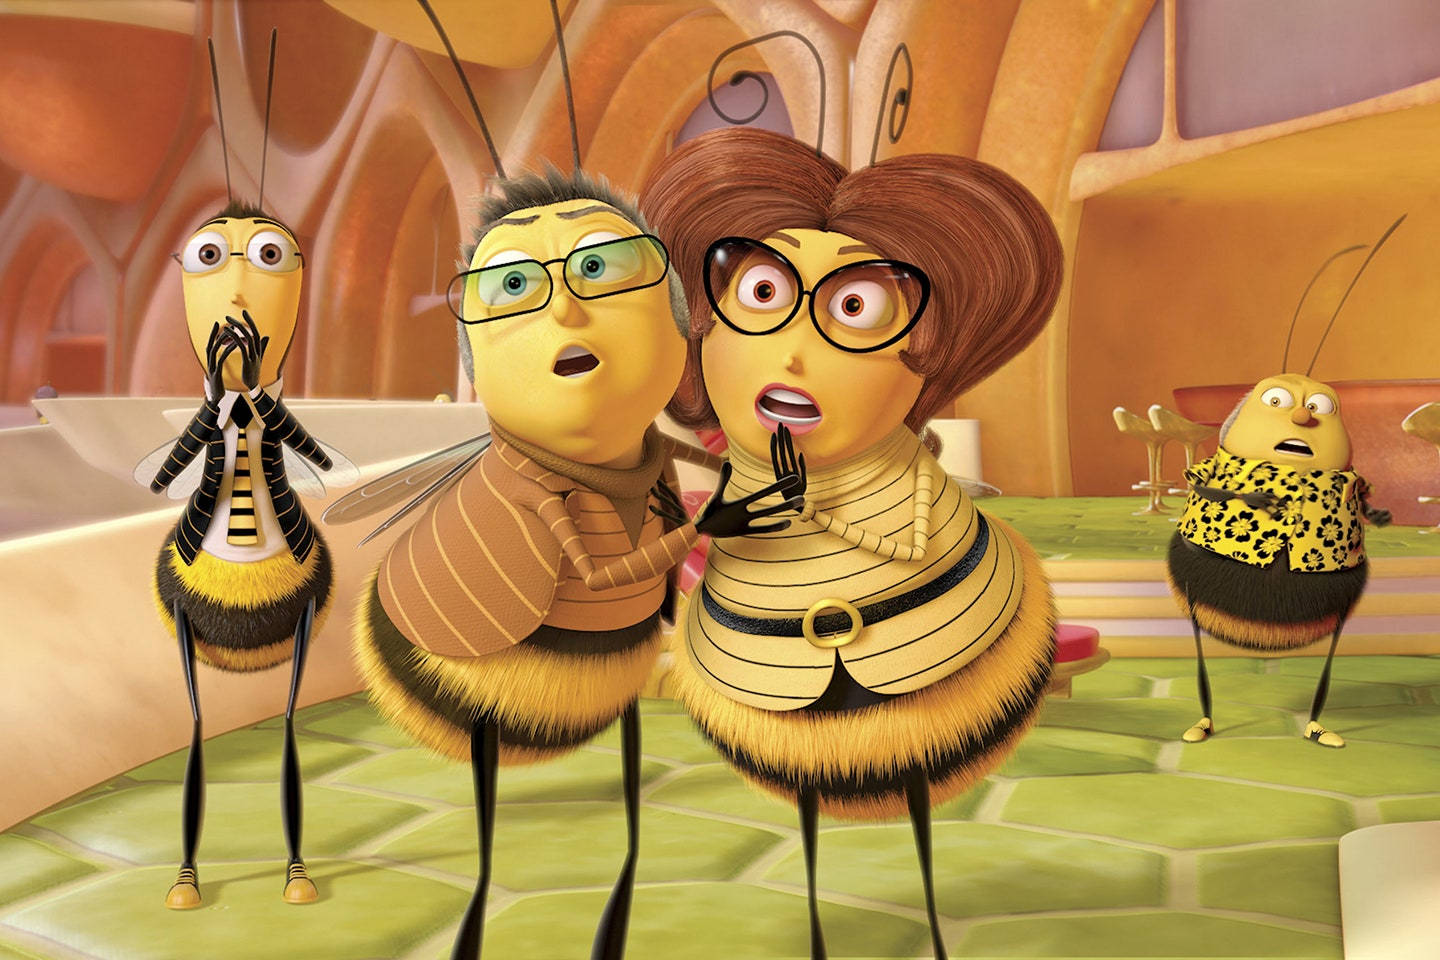 Bees Movie - A Group Of Bees In A Room Wallpaper